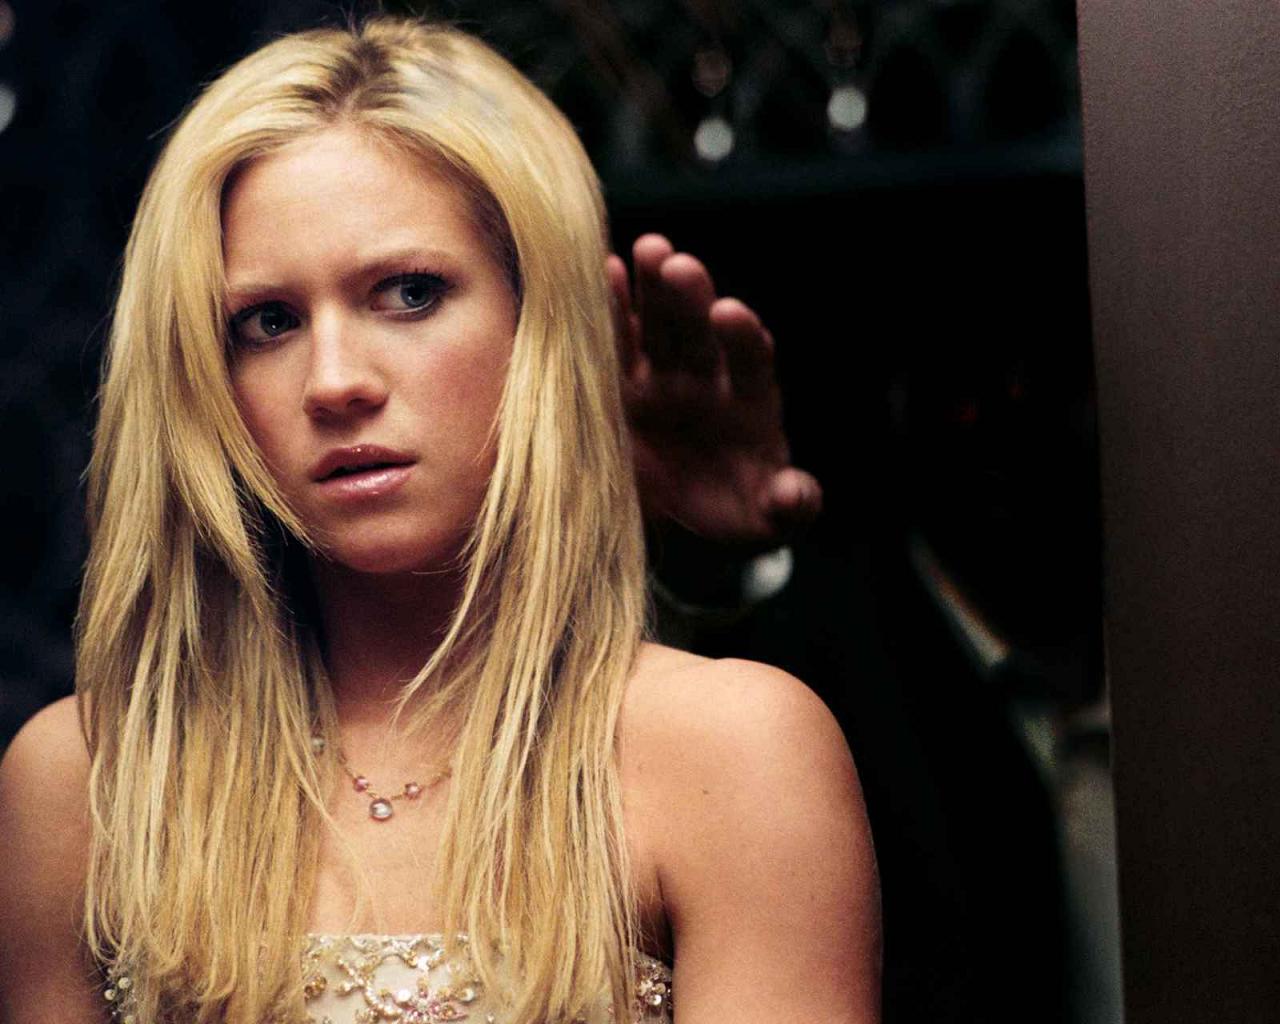 HD Wallpapers Brittany Snow stars in Screen Gems' thriller PROM NIGHT